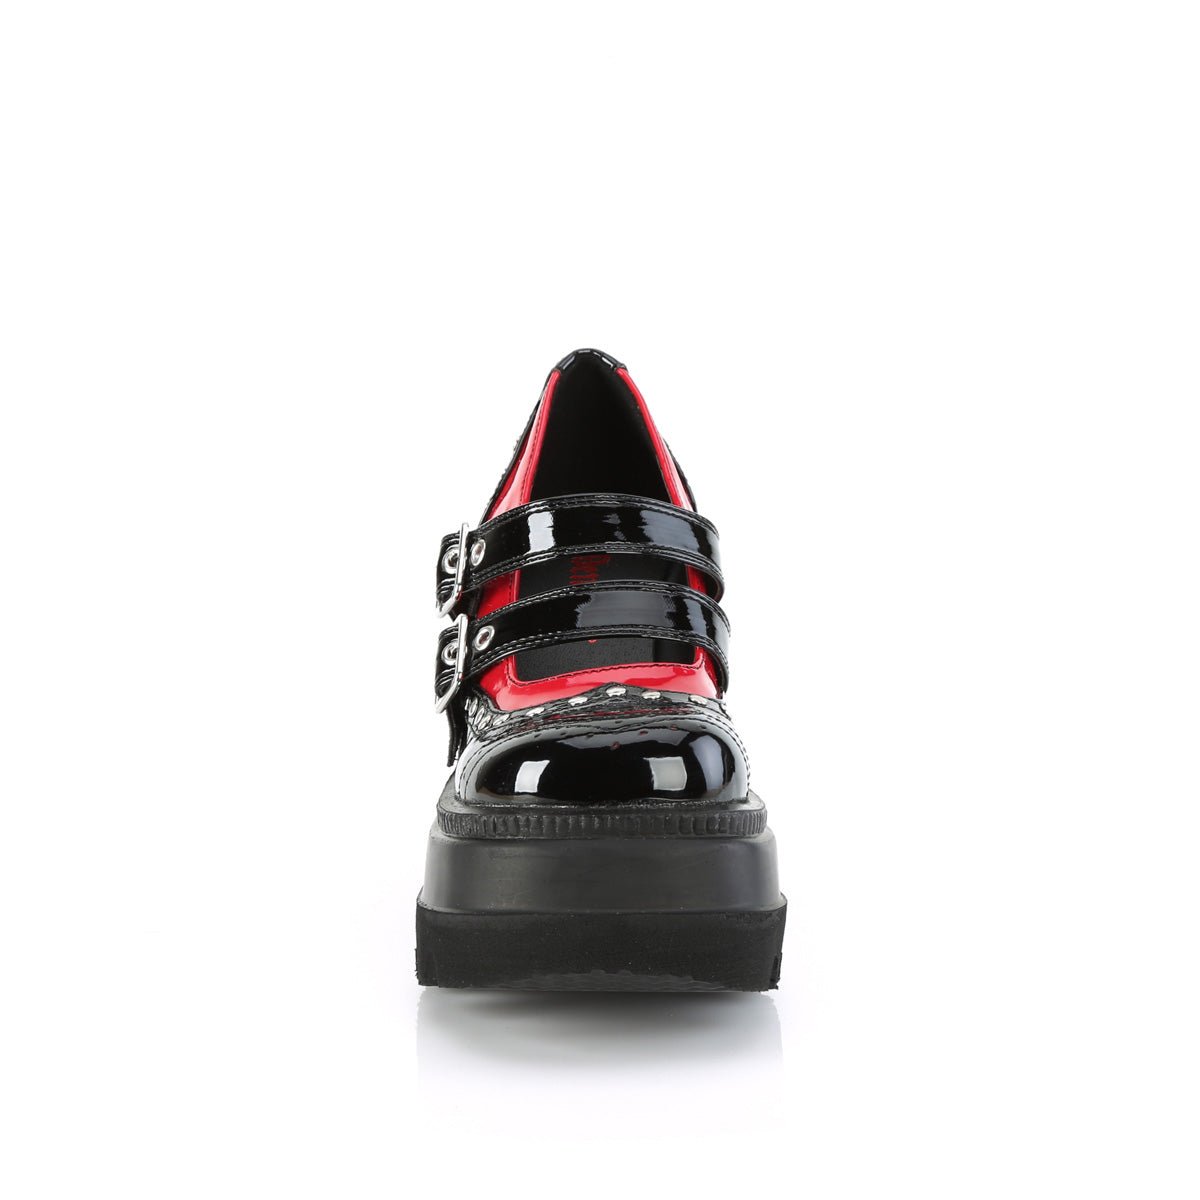 Too Fast | Demonia Shaker 27 | Black &amp; Red Patent Leather Women&#39;s Mary Janes